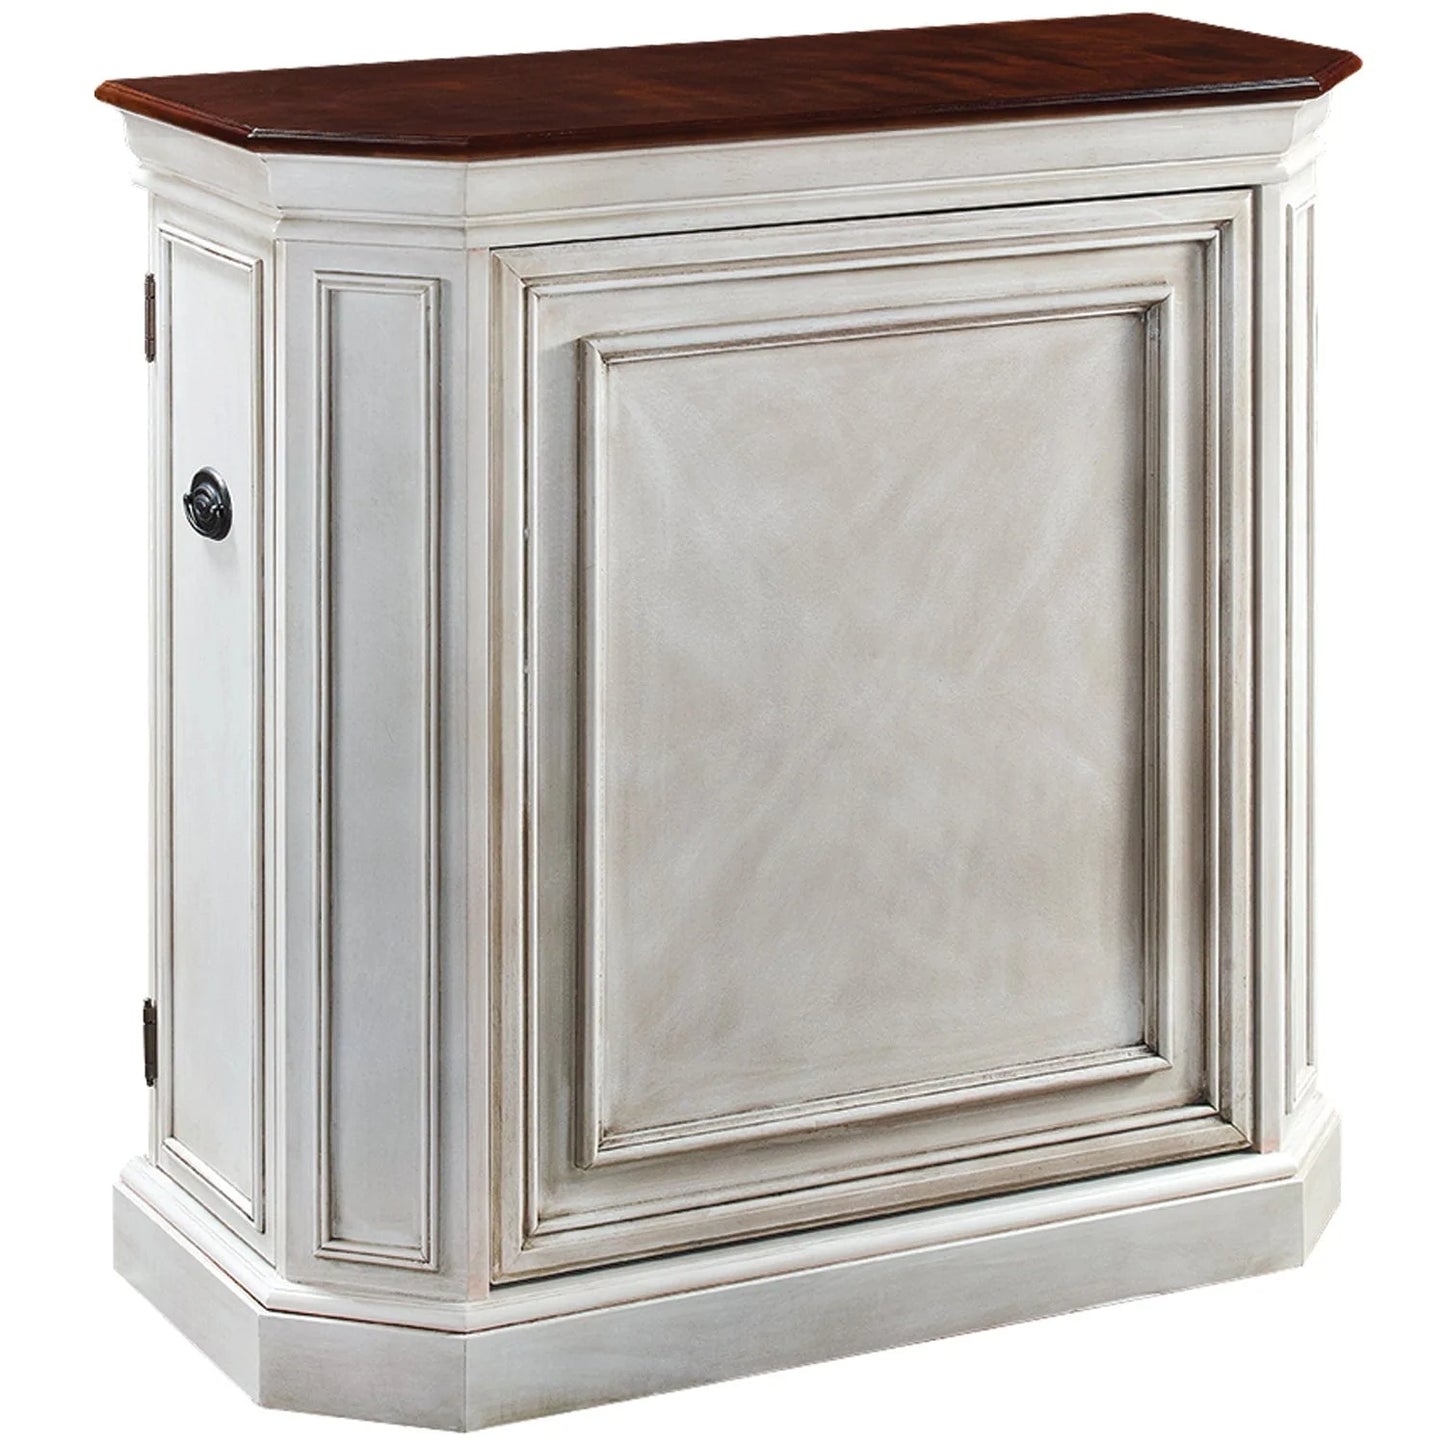 RAM Game Room Bars & Cabinets BRCB1 AW Bar Cabinet w/ Spindle - Antique White